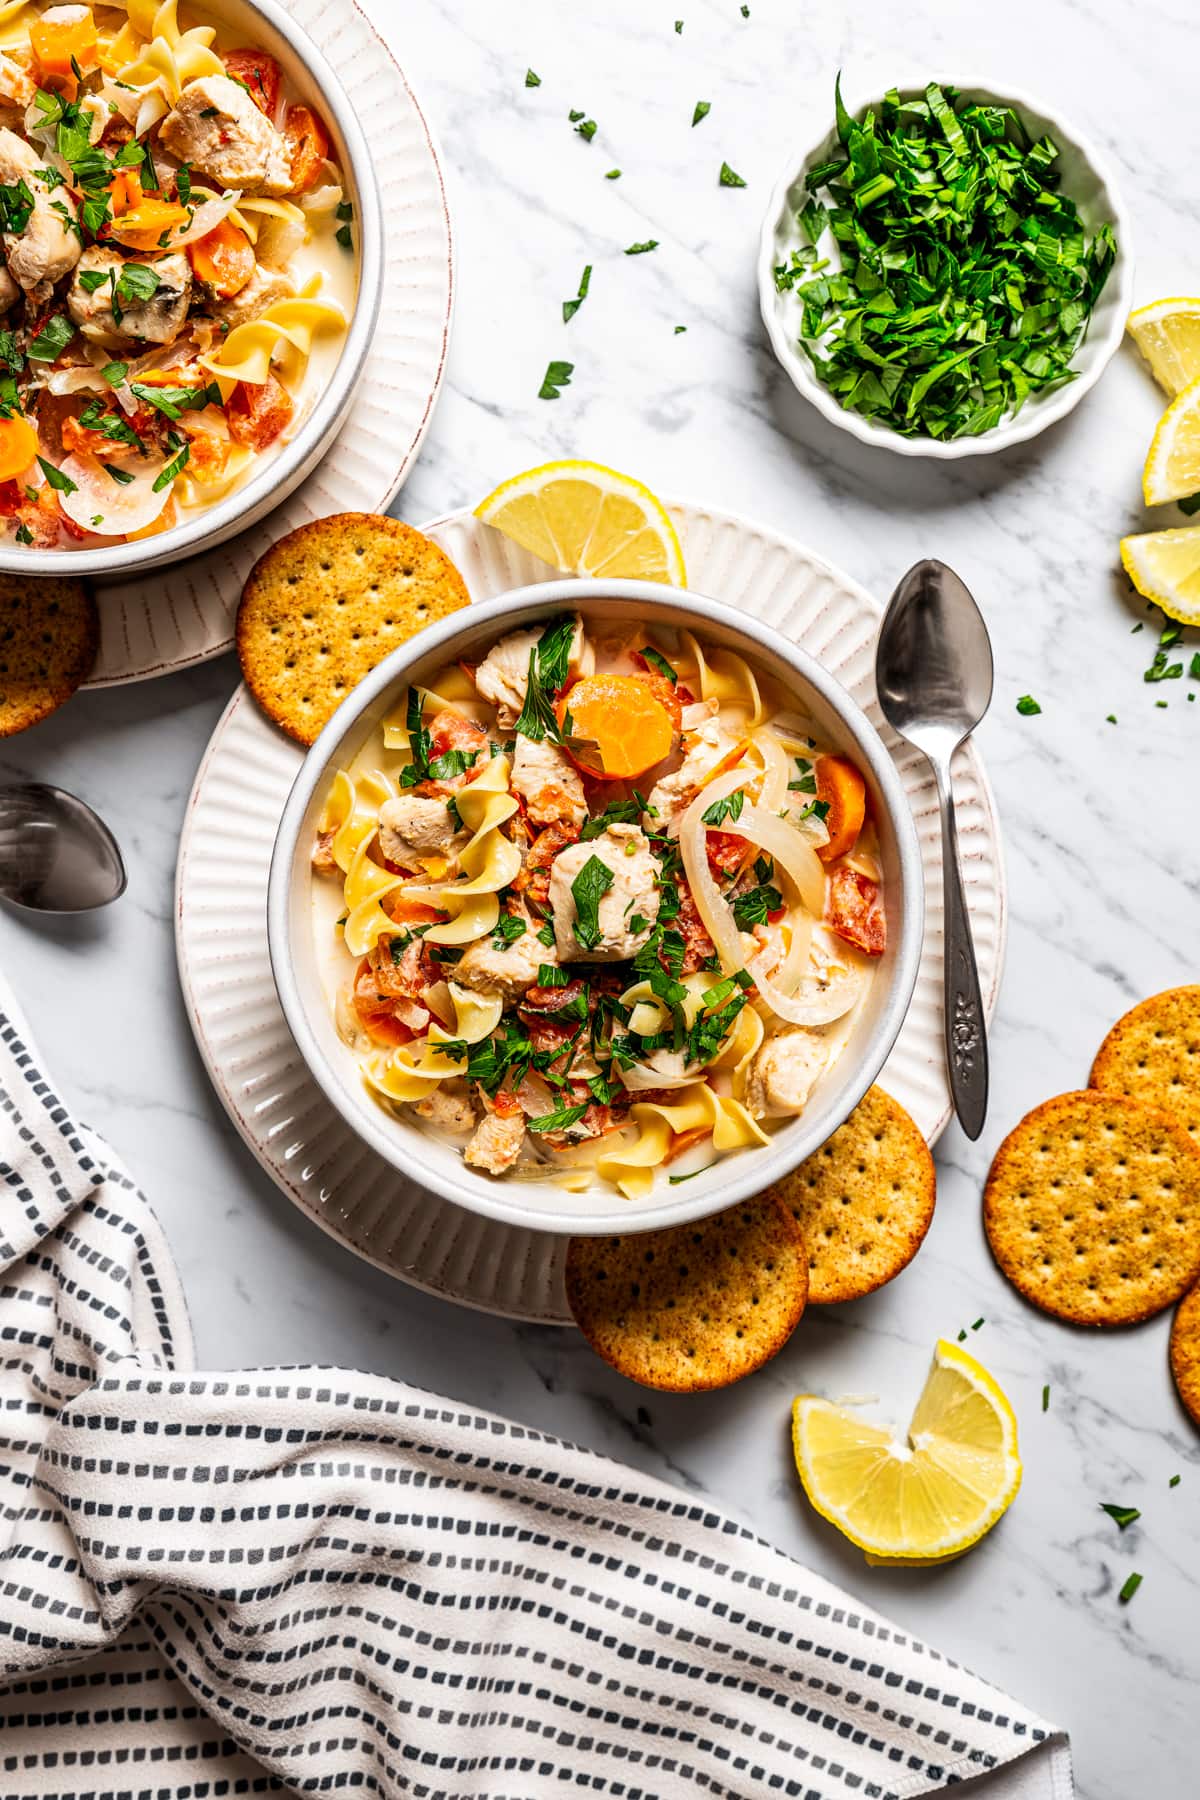 Creamy chicken pasta served in two bowls, with crackers and lemons arranged around the bowls.